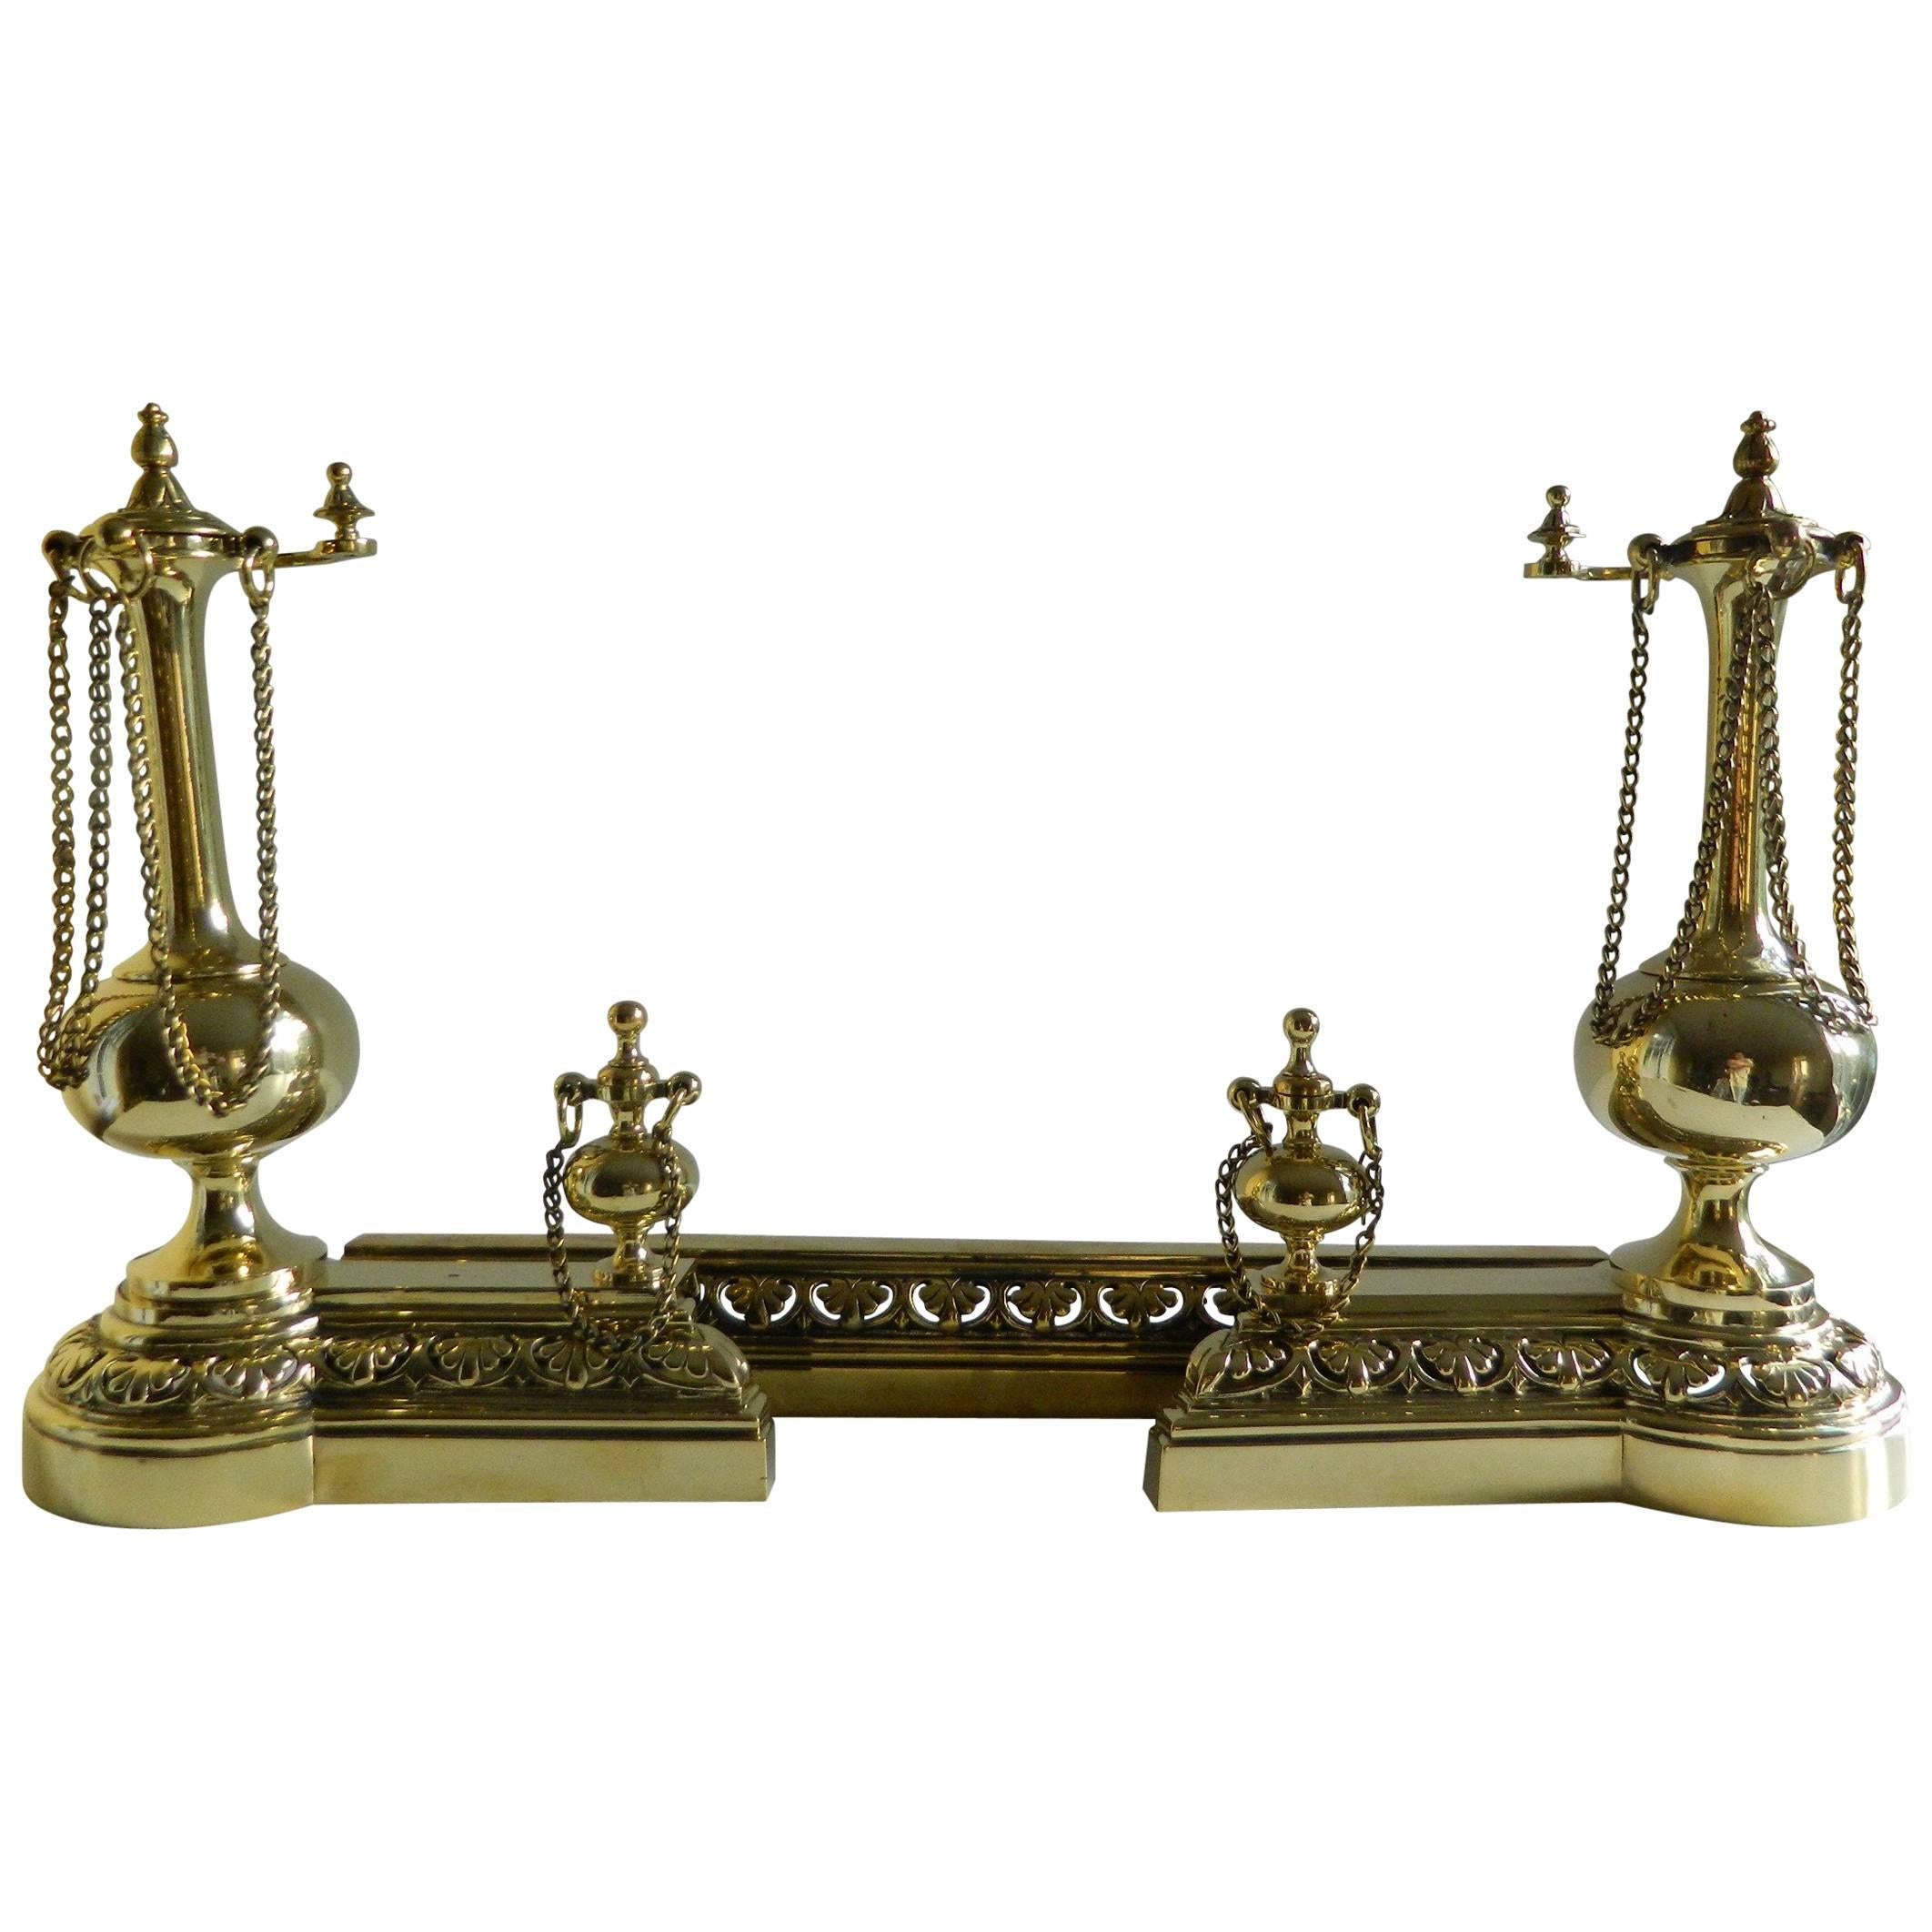 Pair of Polished Brass Chenets or Andirons with Fender, 19th Century